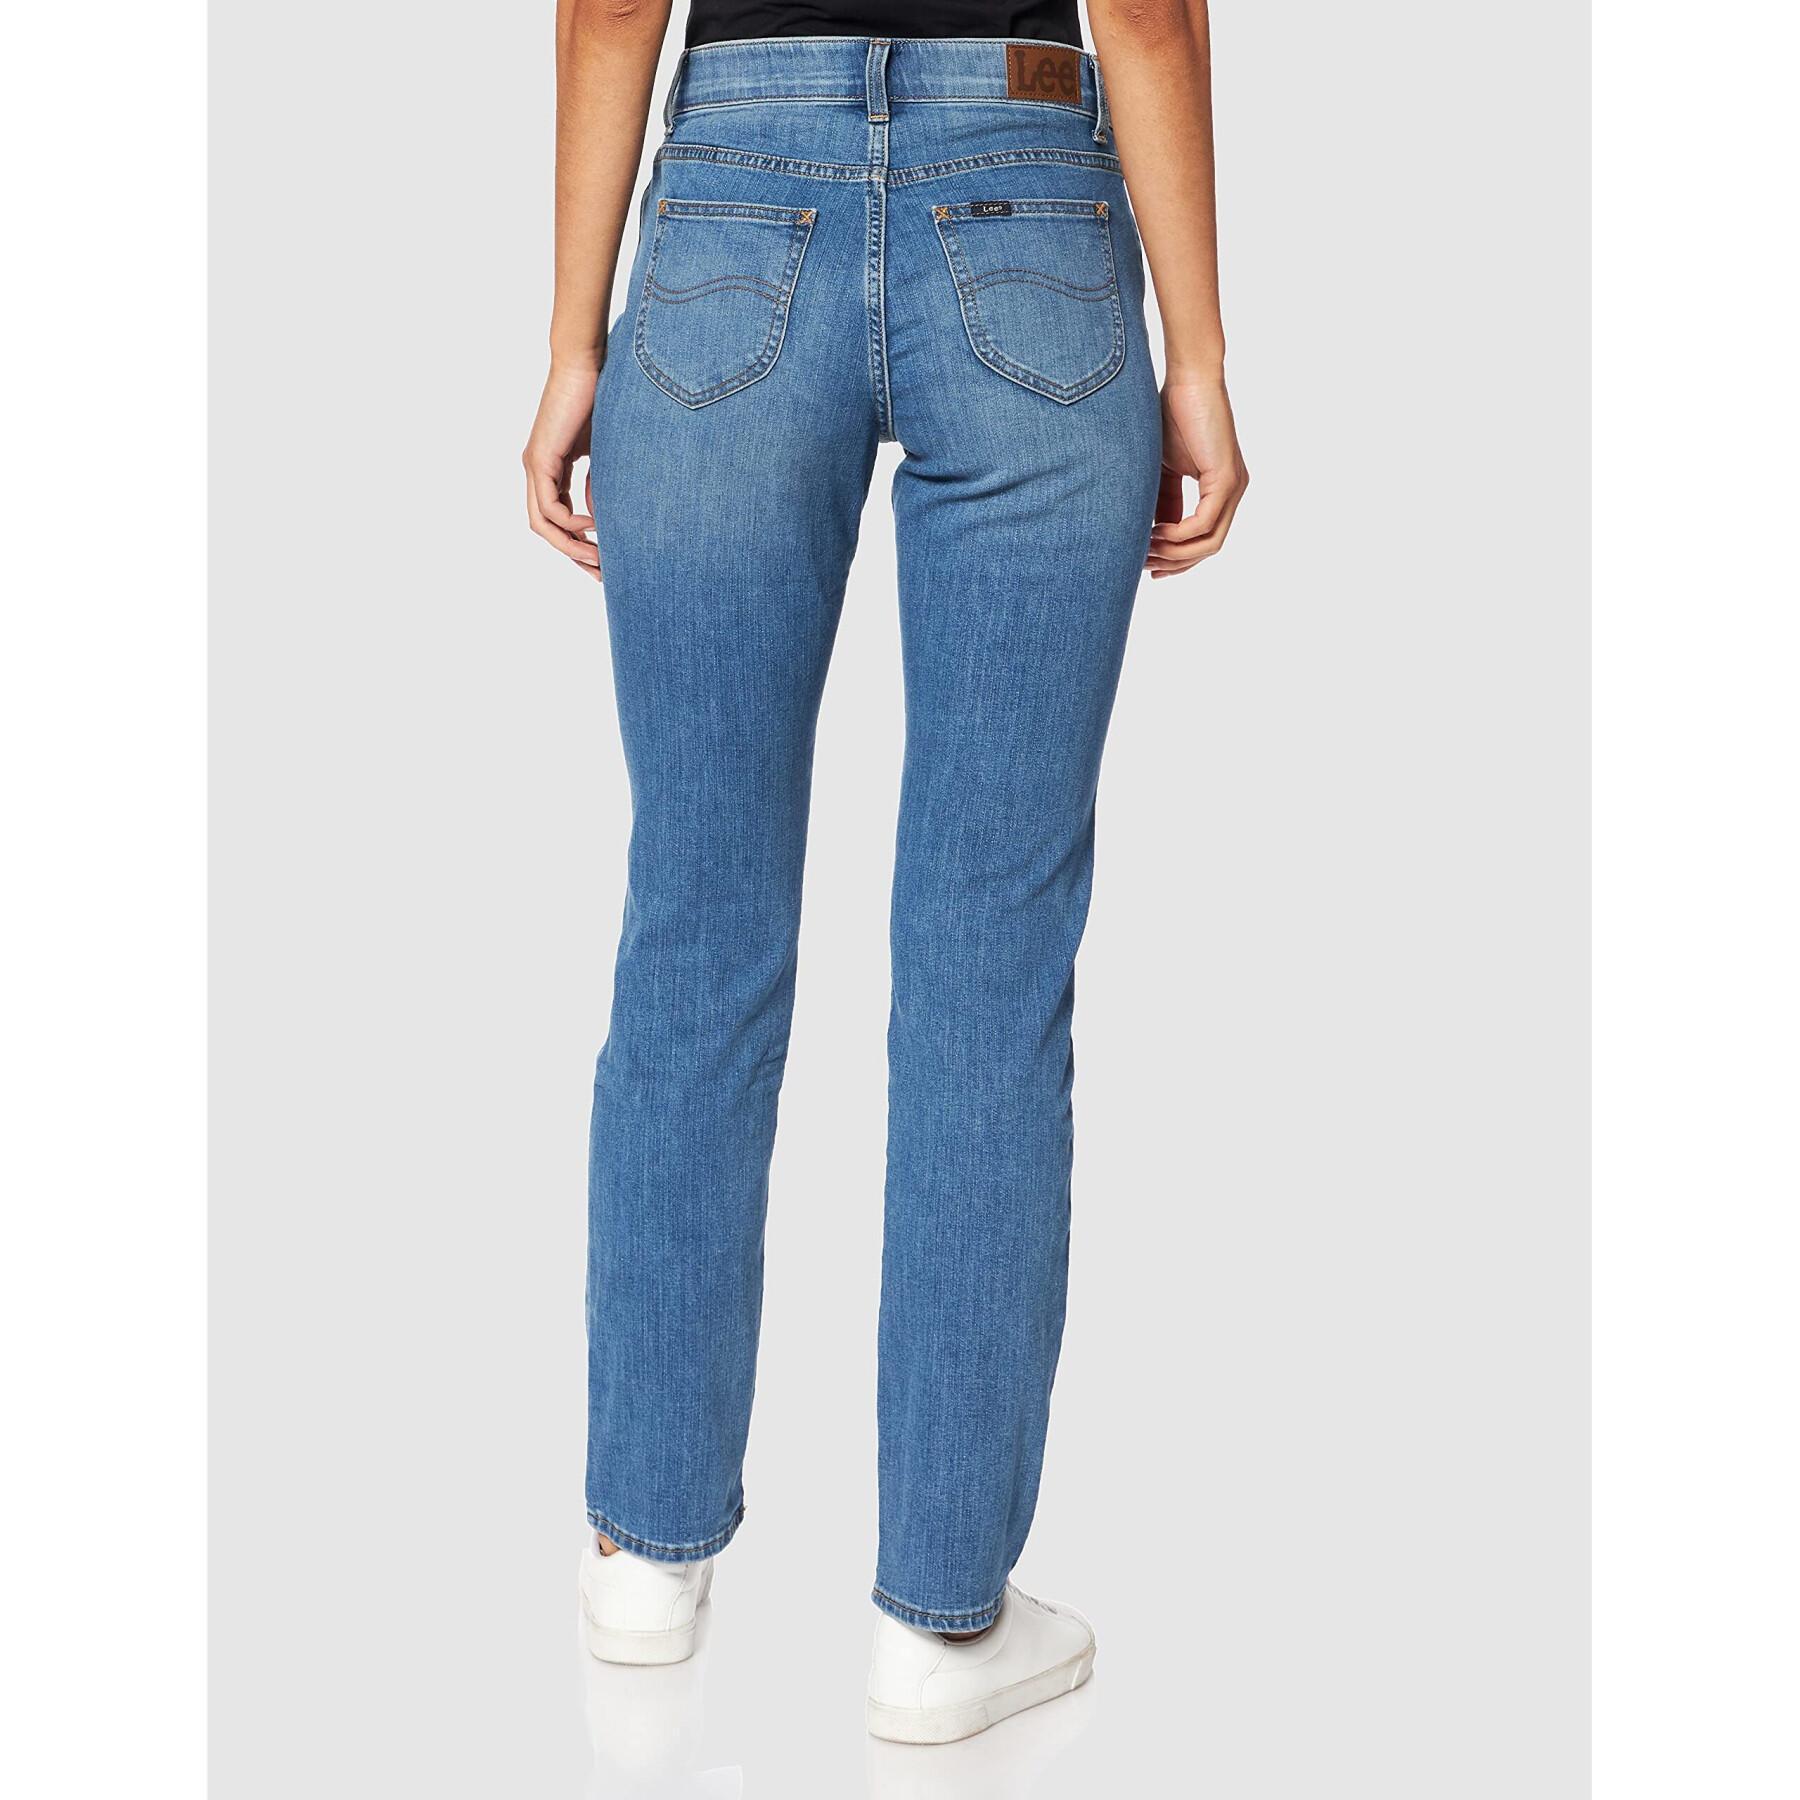 Jeans femme Lee Confort Straight